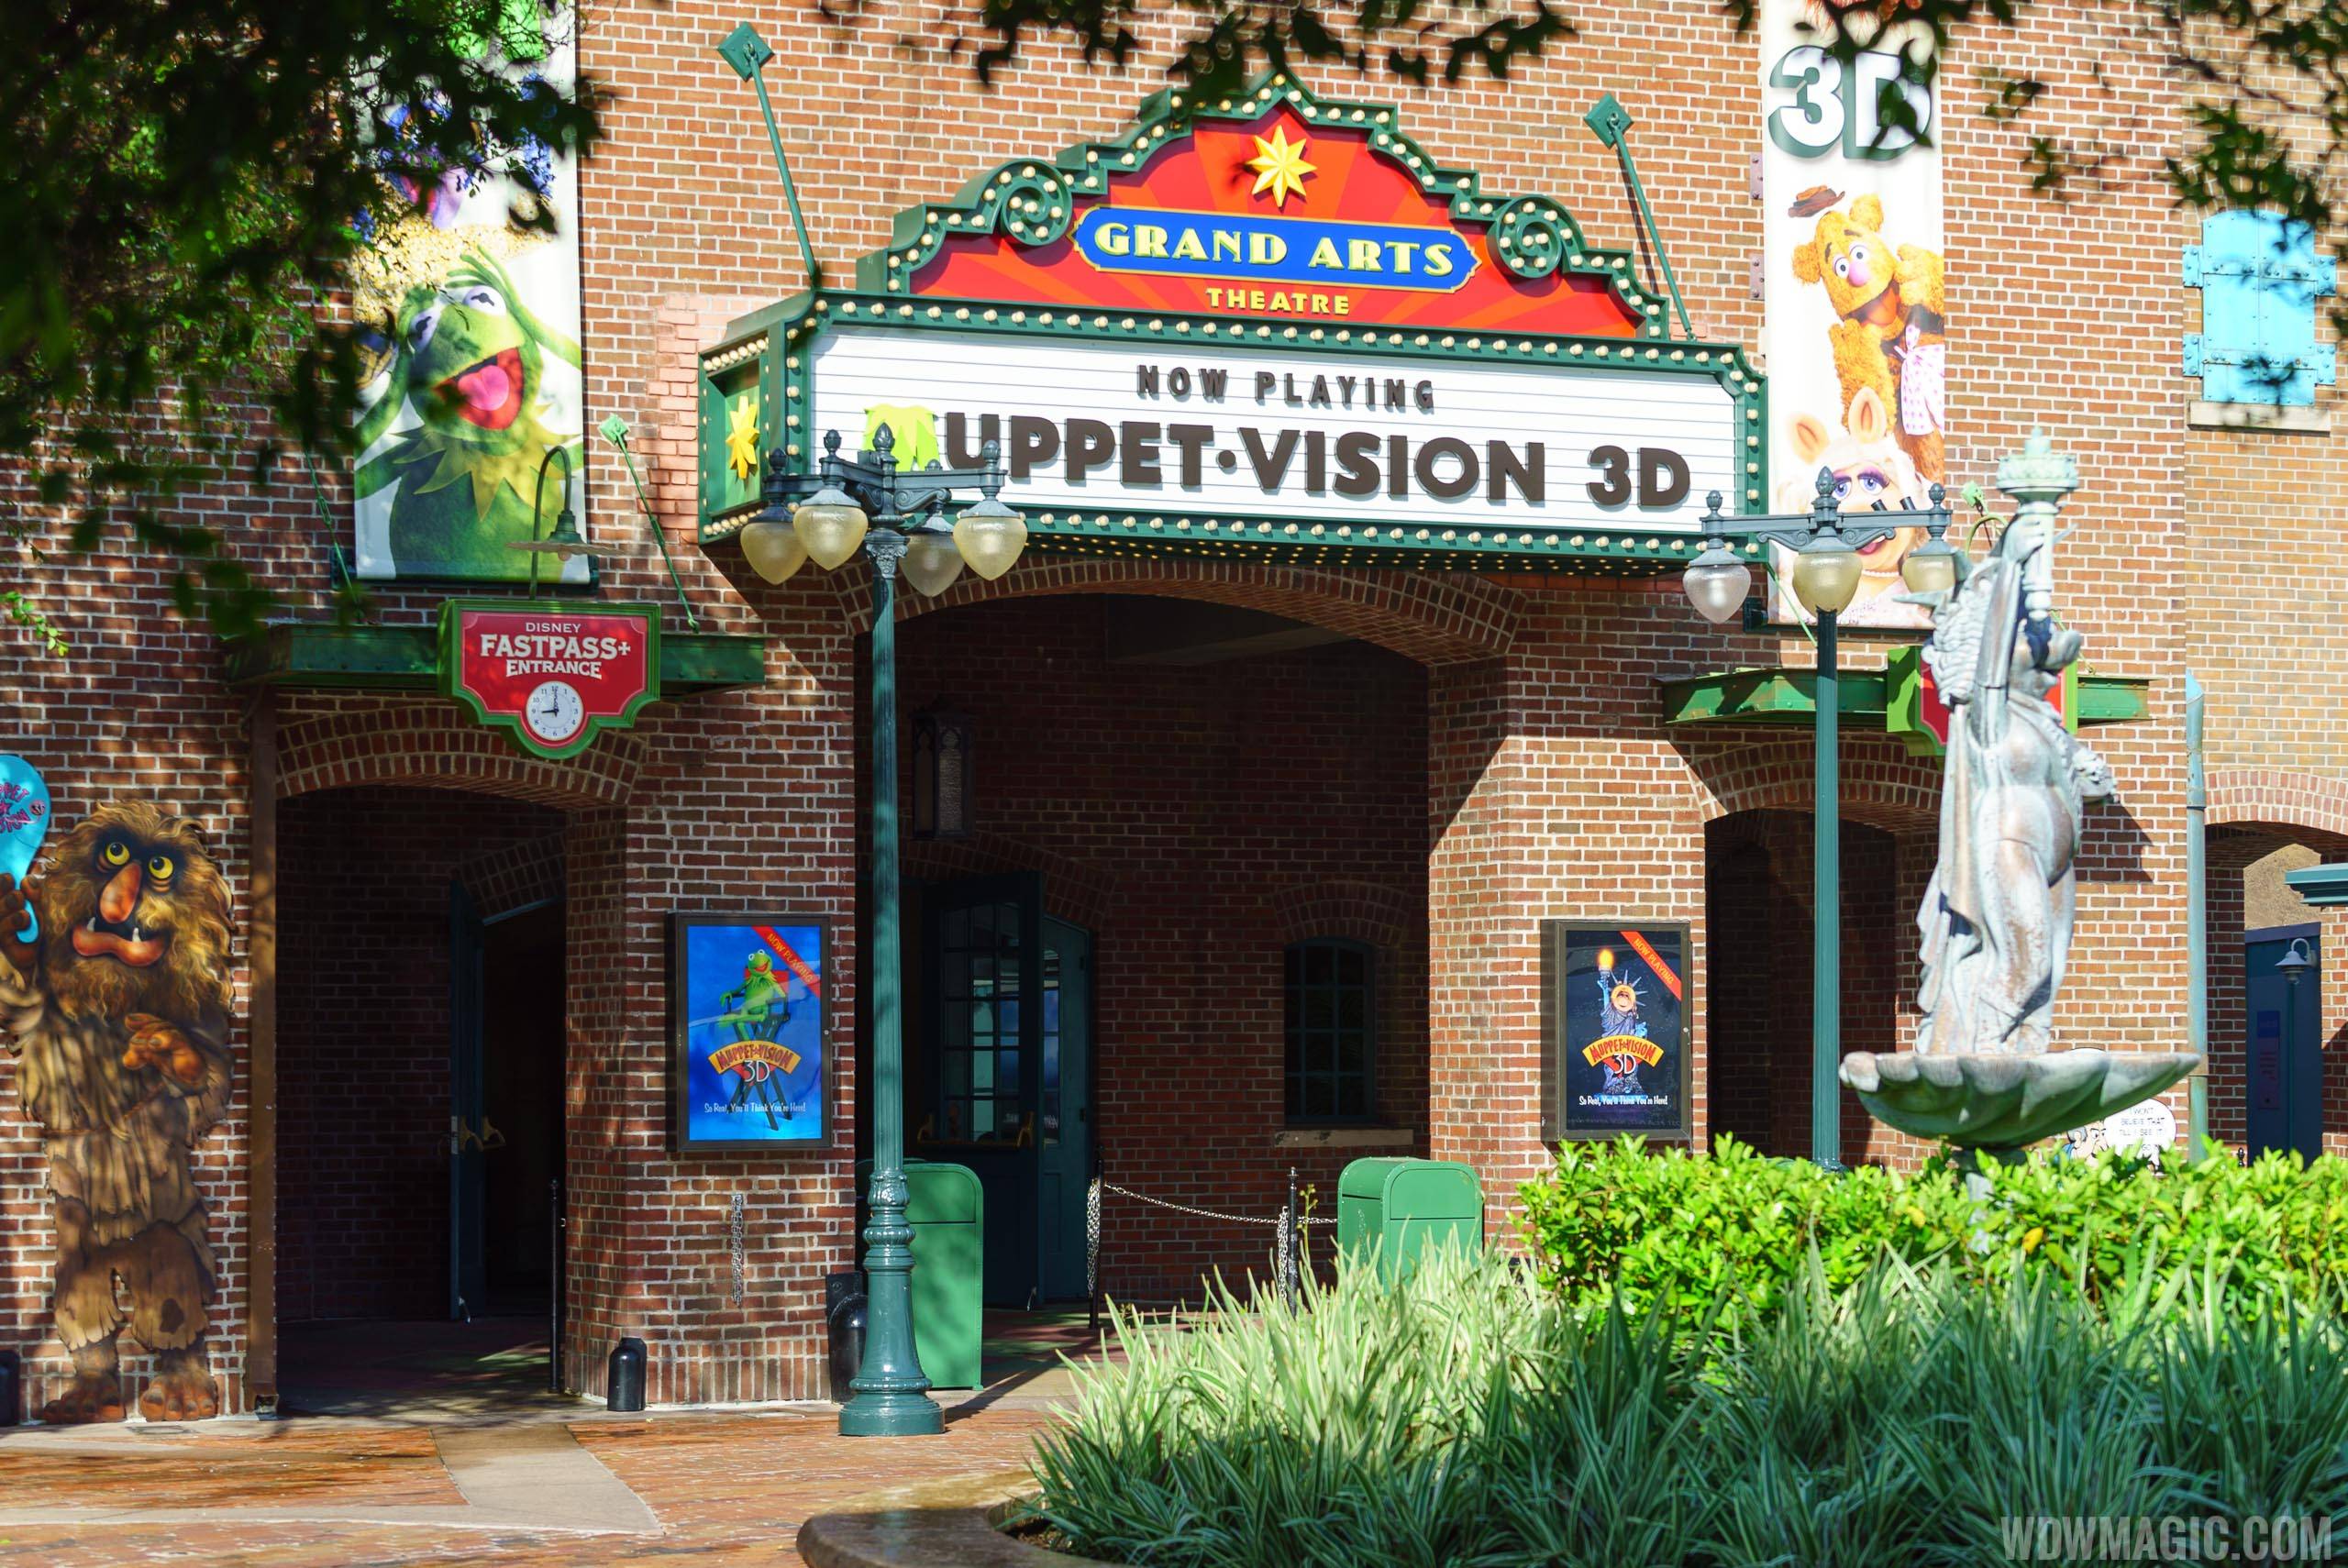 Muppet*Vision 3D has a neat new visual effect to enhance the show